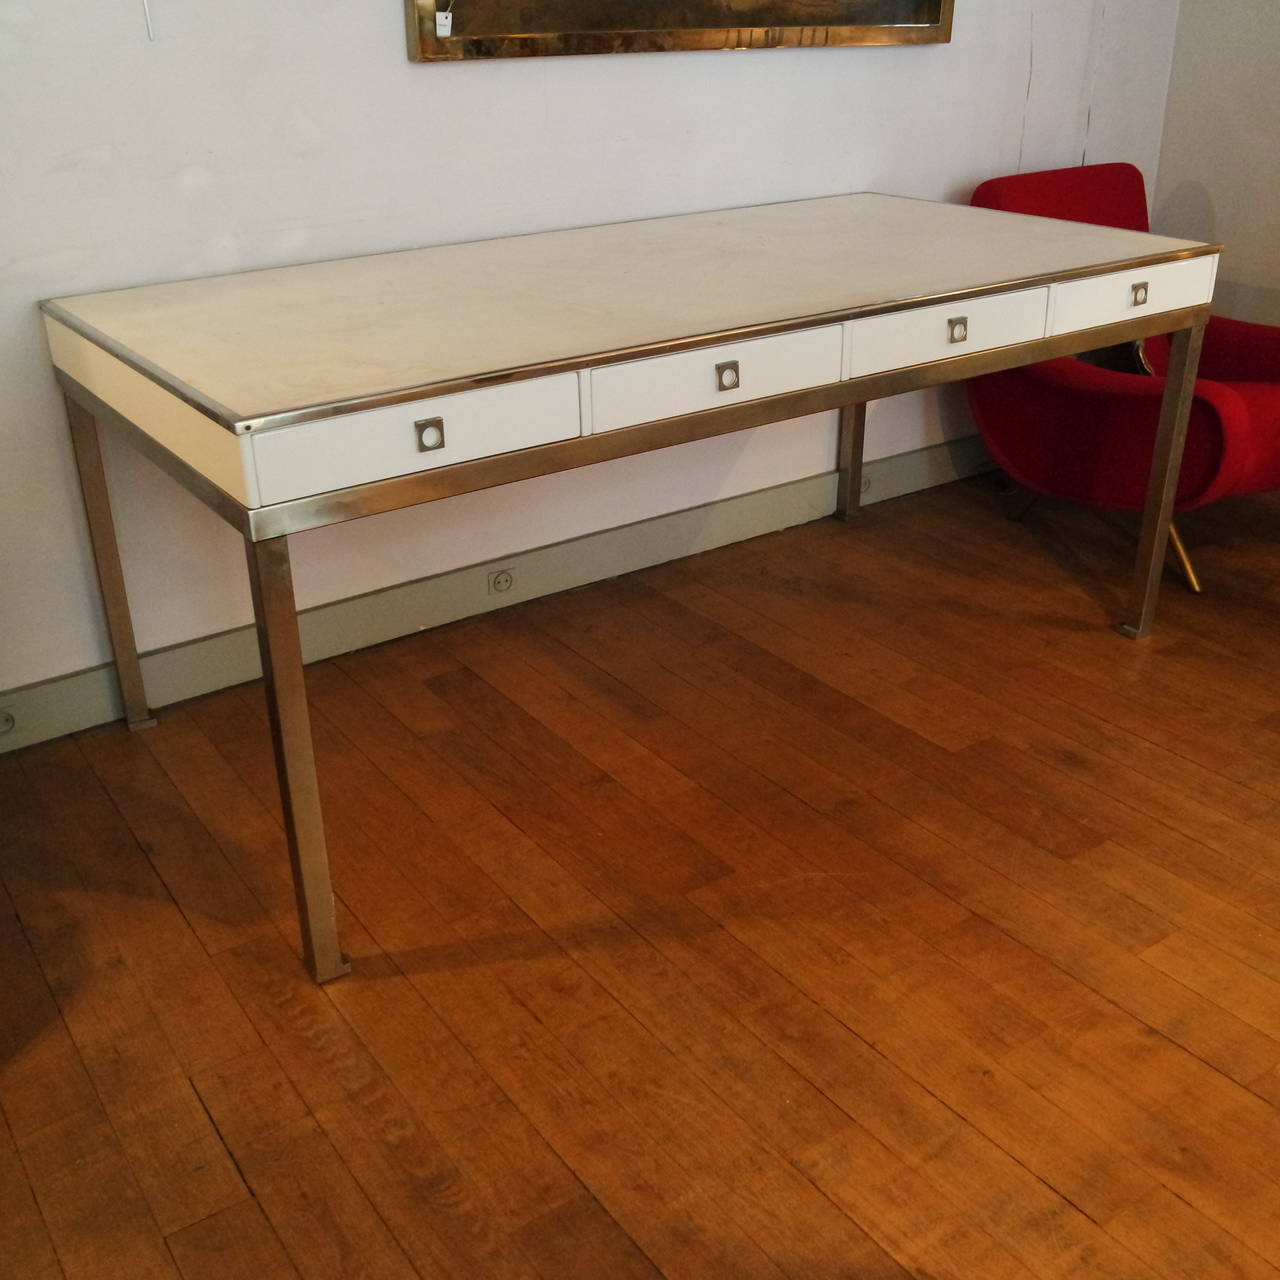 Large and important desk by Guy Lefèvre for Jansen.
Brass feet and structure, white lacquered mahogany with four drawers
Our price includes the changement and remove of the top into a white leather.